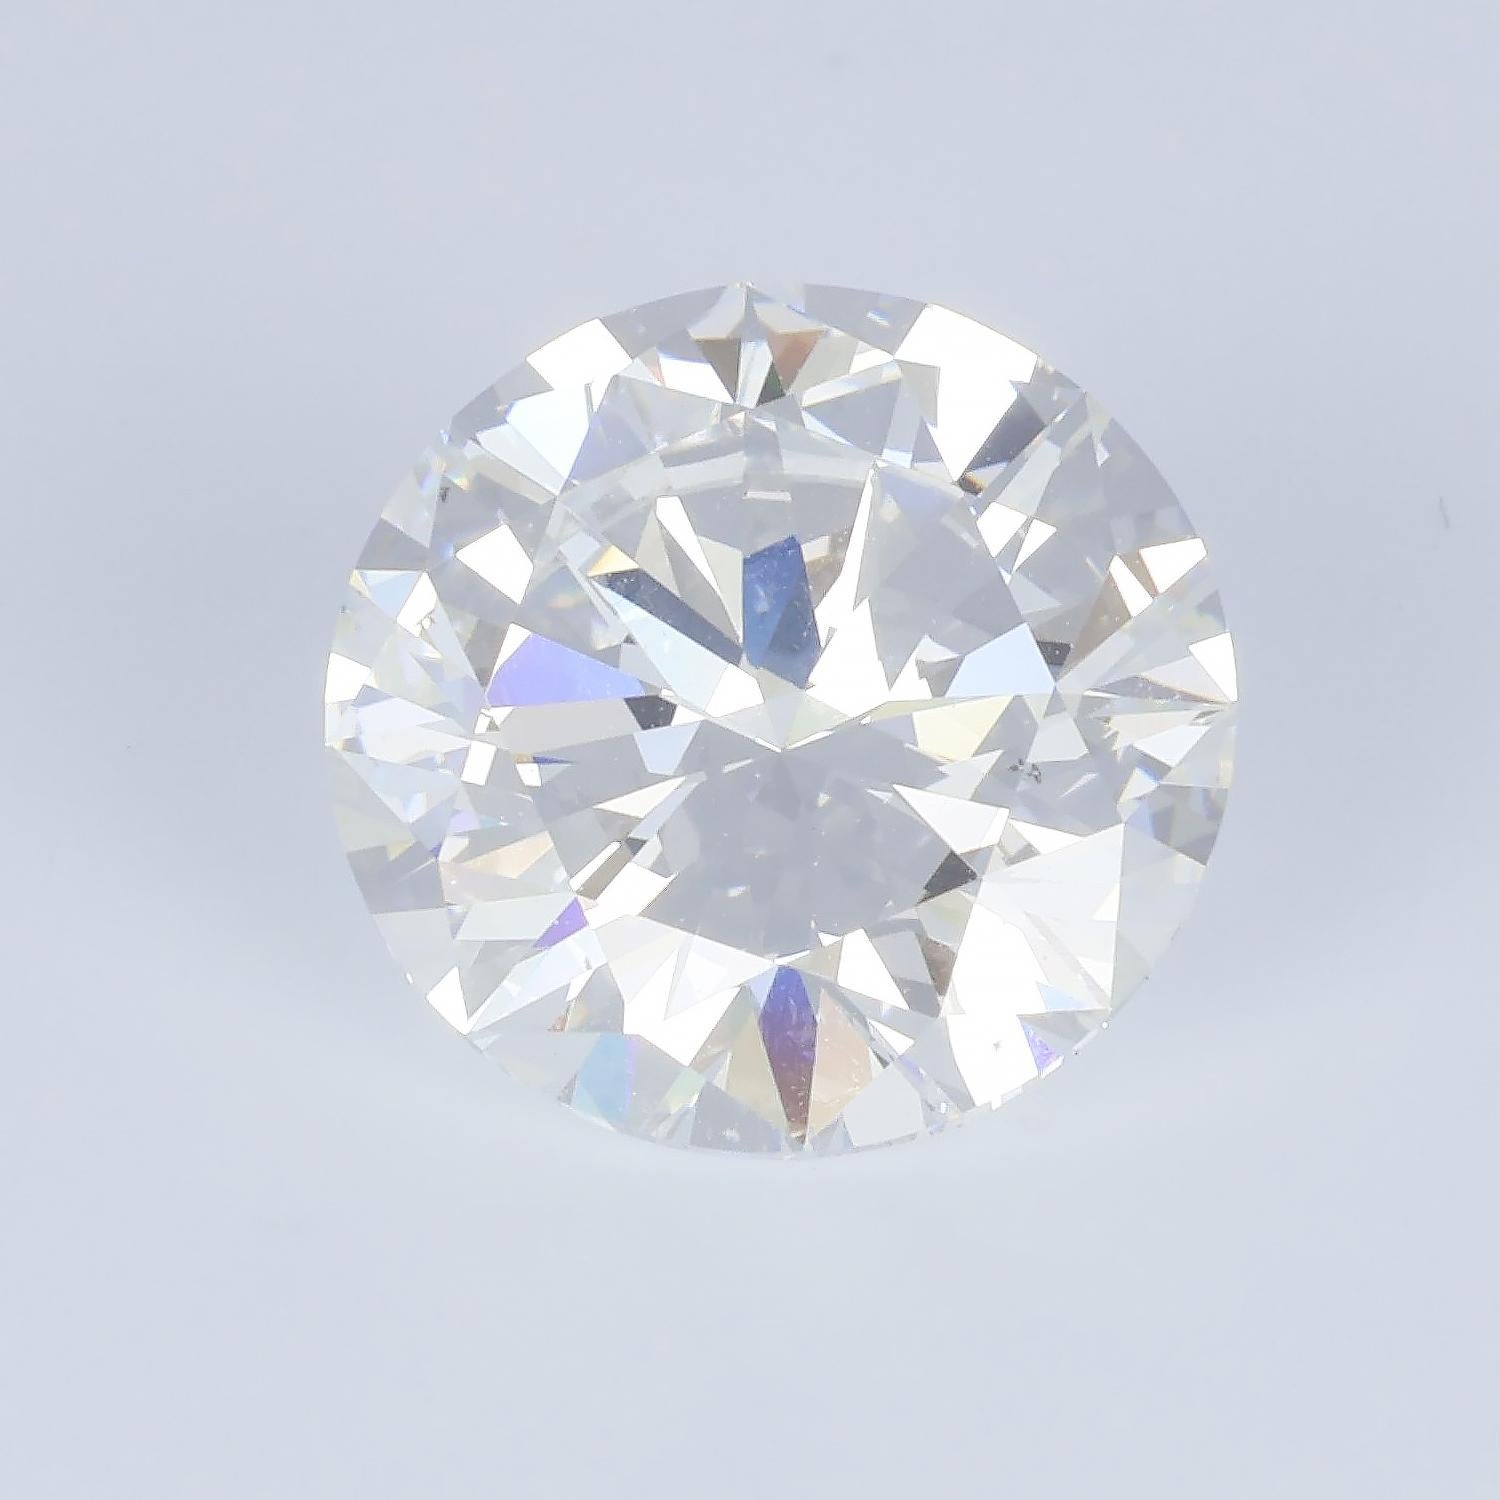 Stunning GIA 5.01 Carat E VS2 NO FLUO Certified Engagement Diamond Round Brilliant Cut

GIA Report Number = 15678430
Shape and Cutting Style = Round Brilliant
Measurements = 11.18 - 11.21 x 6.53 mm
Carat Weight = 5.01 carat
Color Grade = E
Clarity